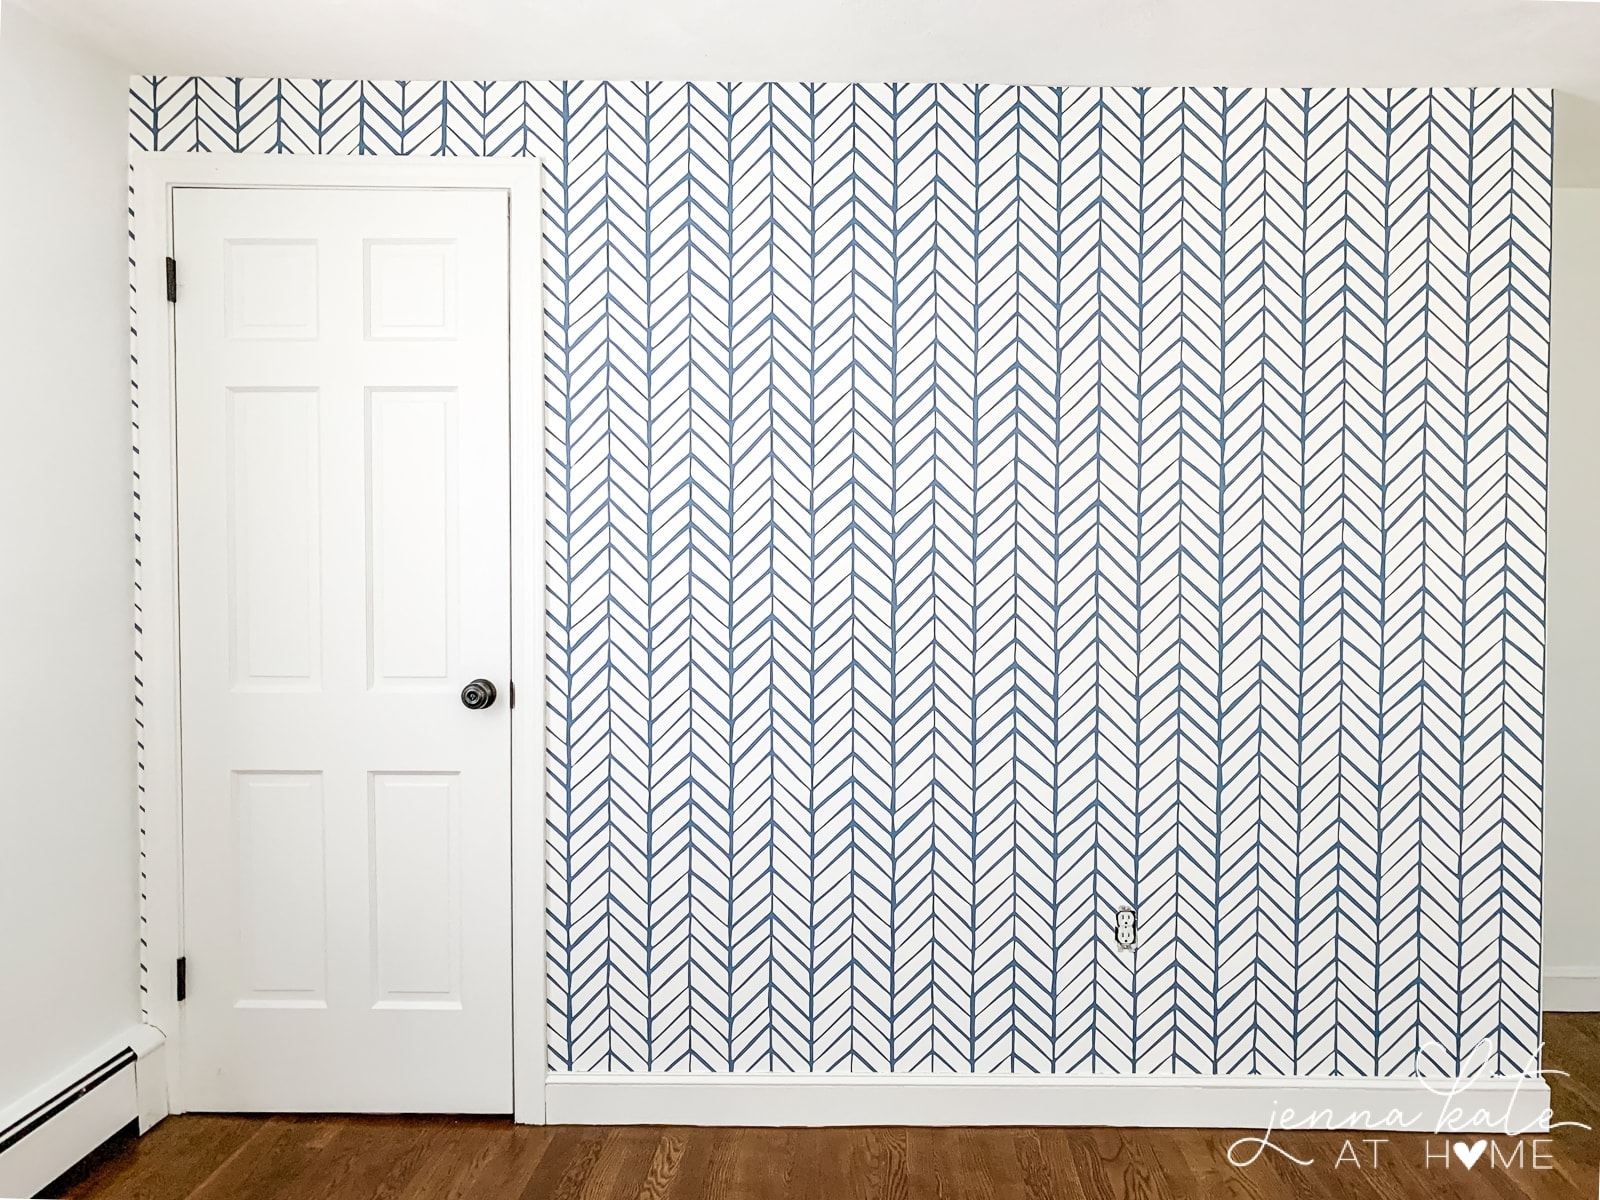 Diy Tutorial Nursery Wallpaper Accent Wall Jenna Kate At Home